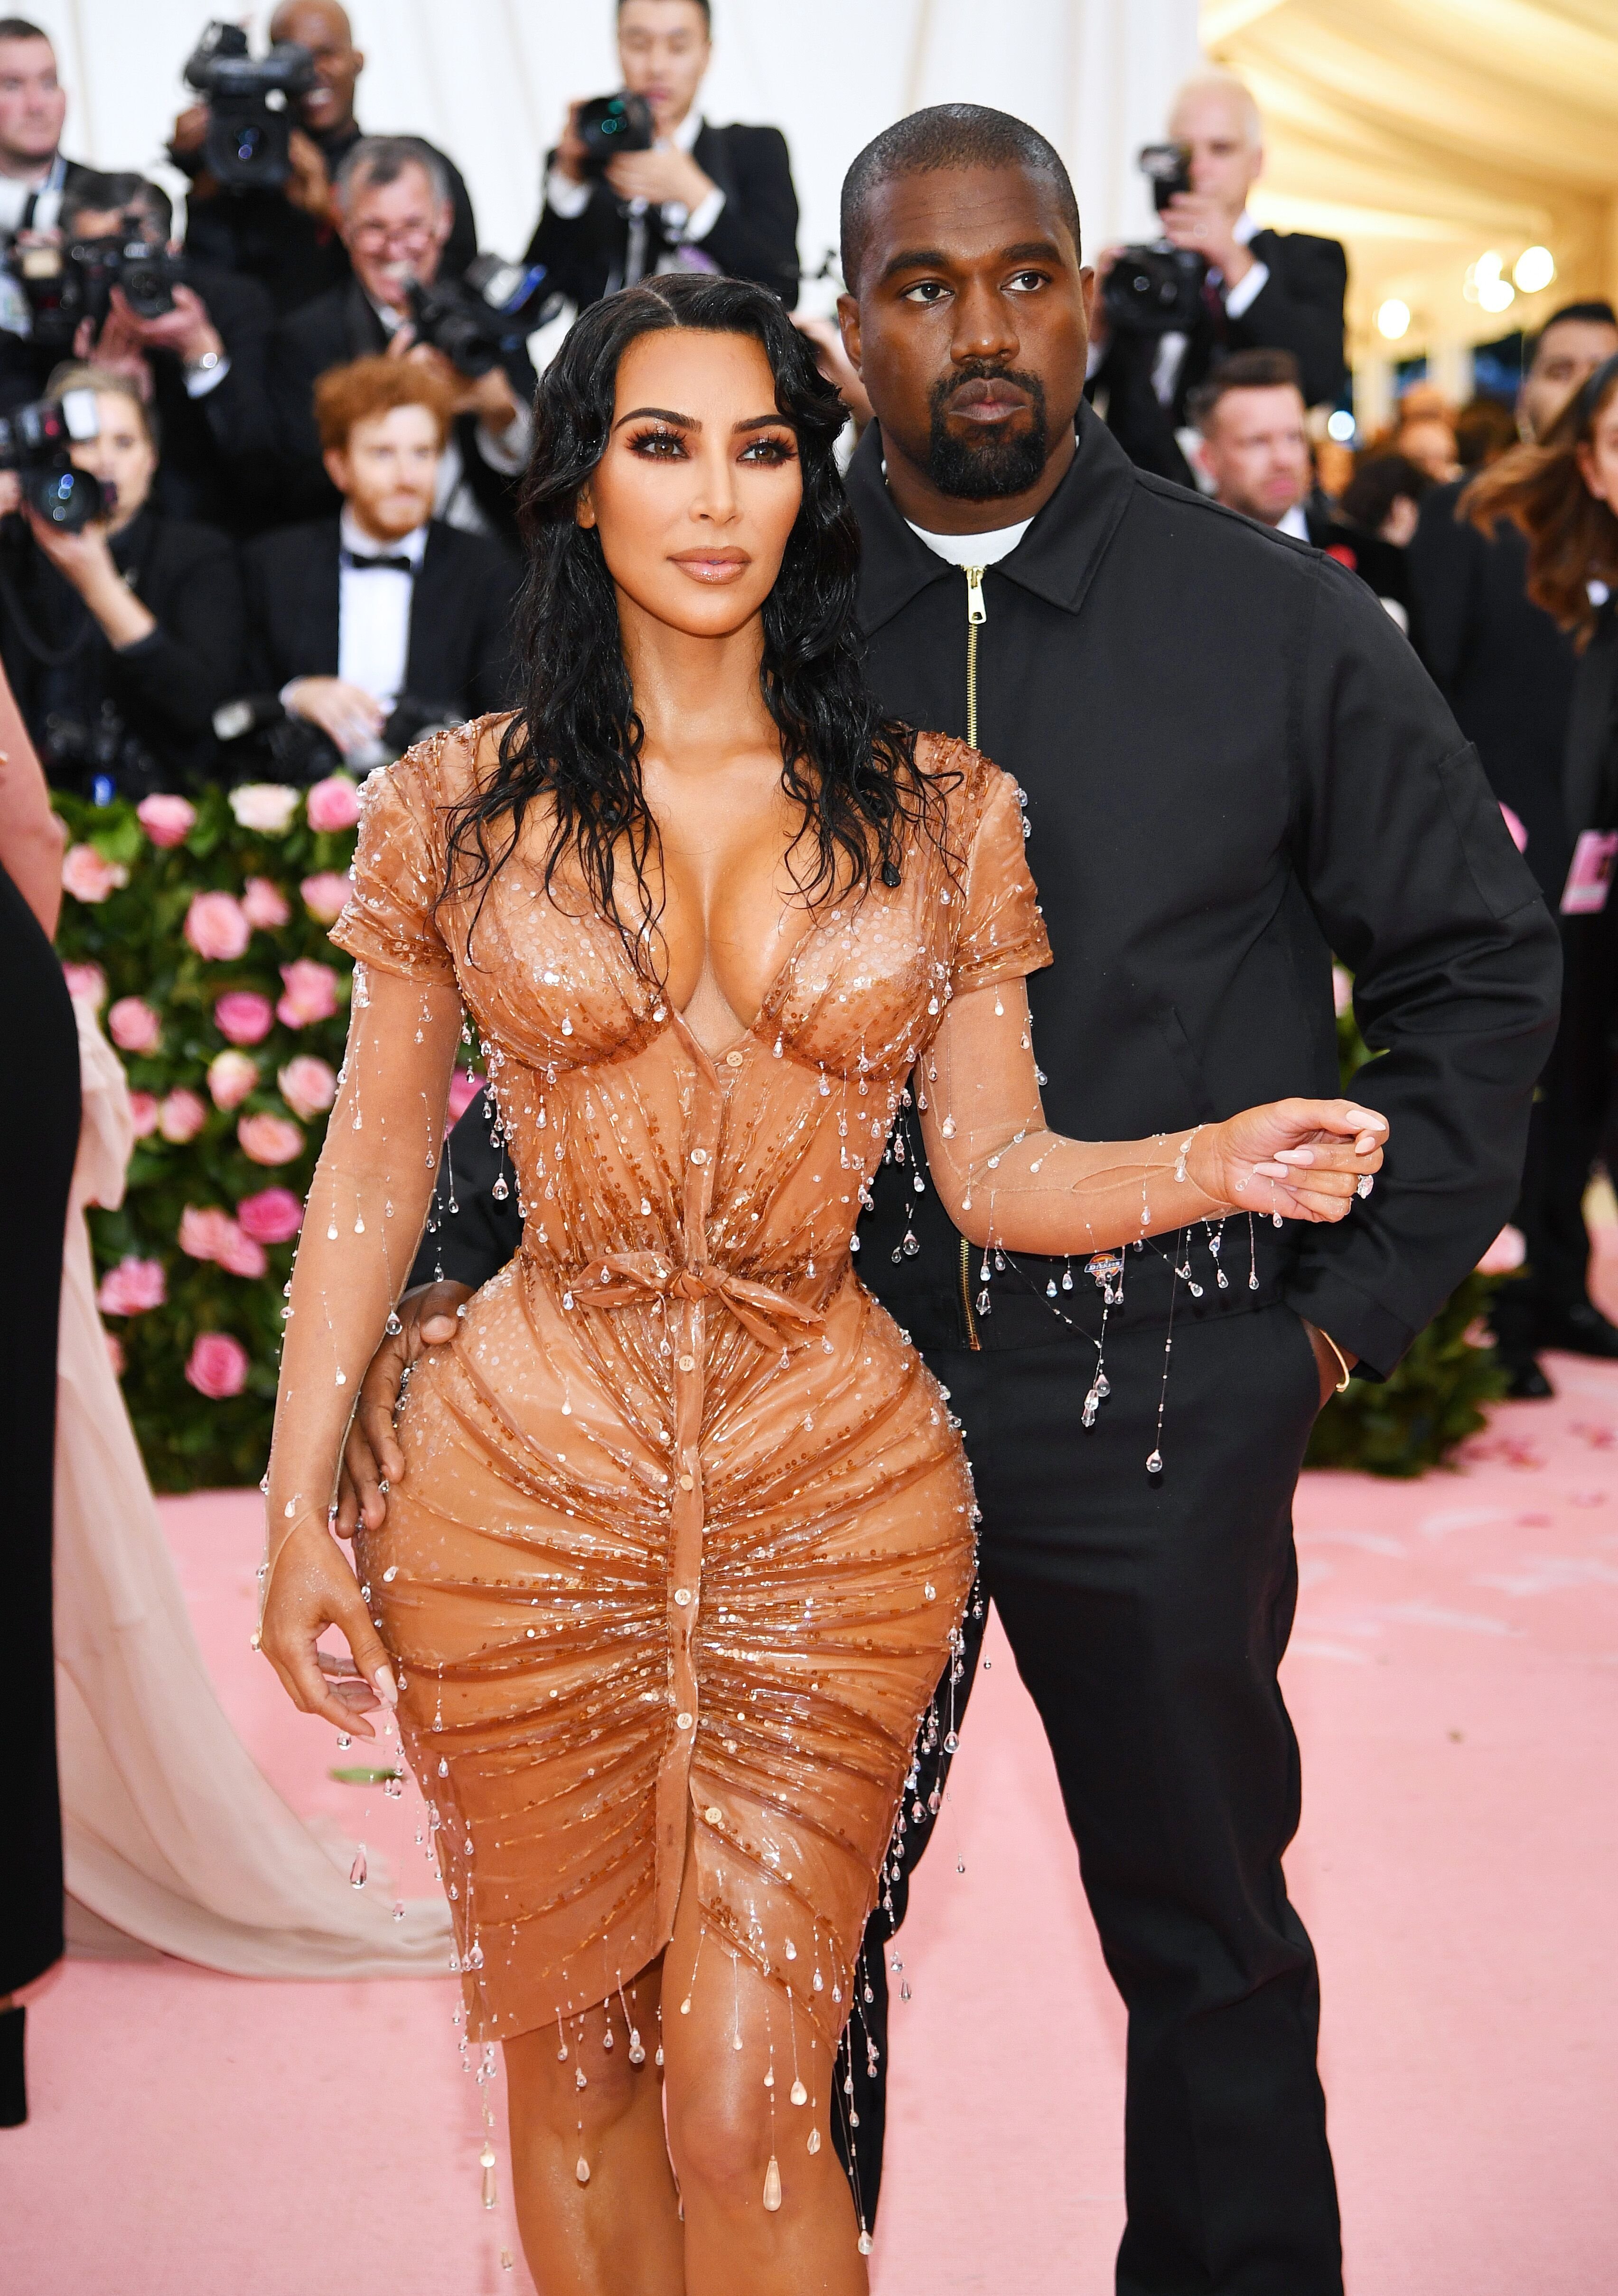 Kim Kardashian West and Kanye West attend The 2019 Met Gala on May 06, 2019 in New York City | Source: Getty Images